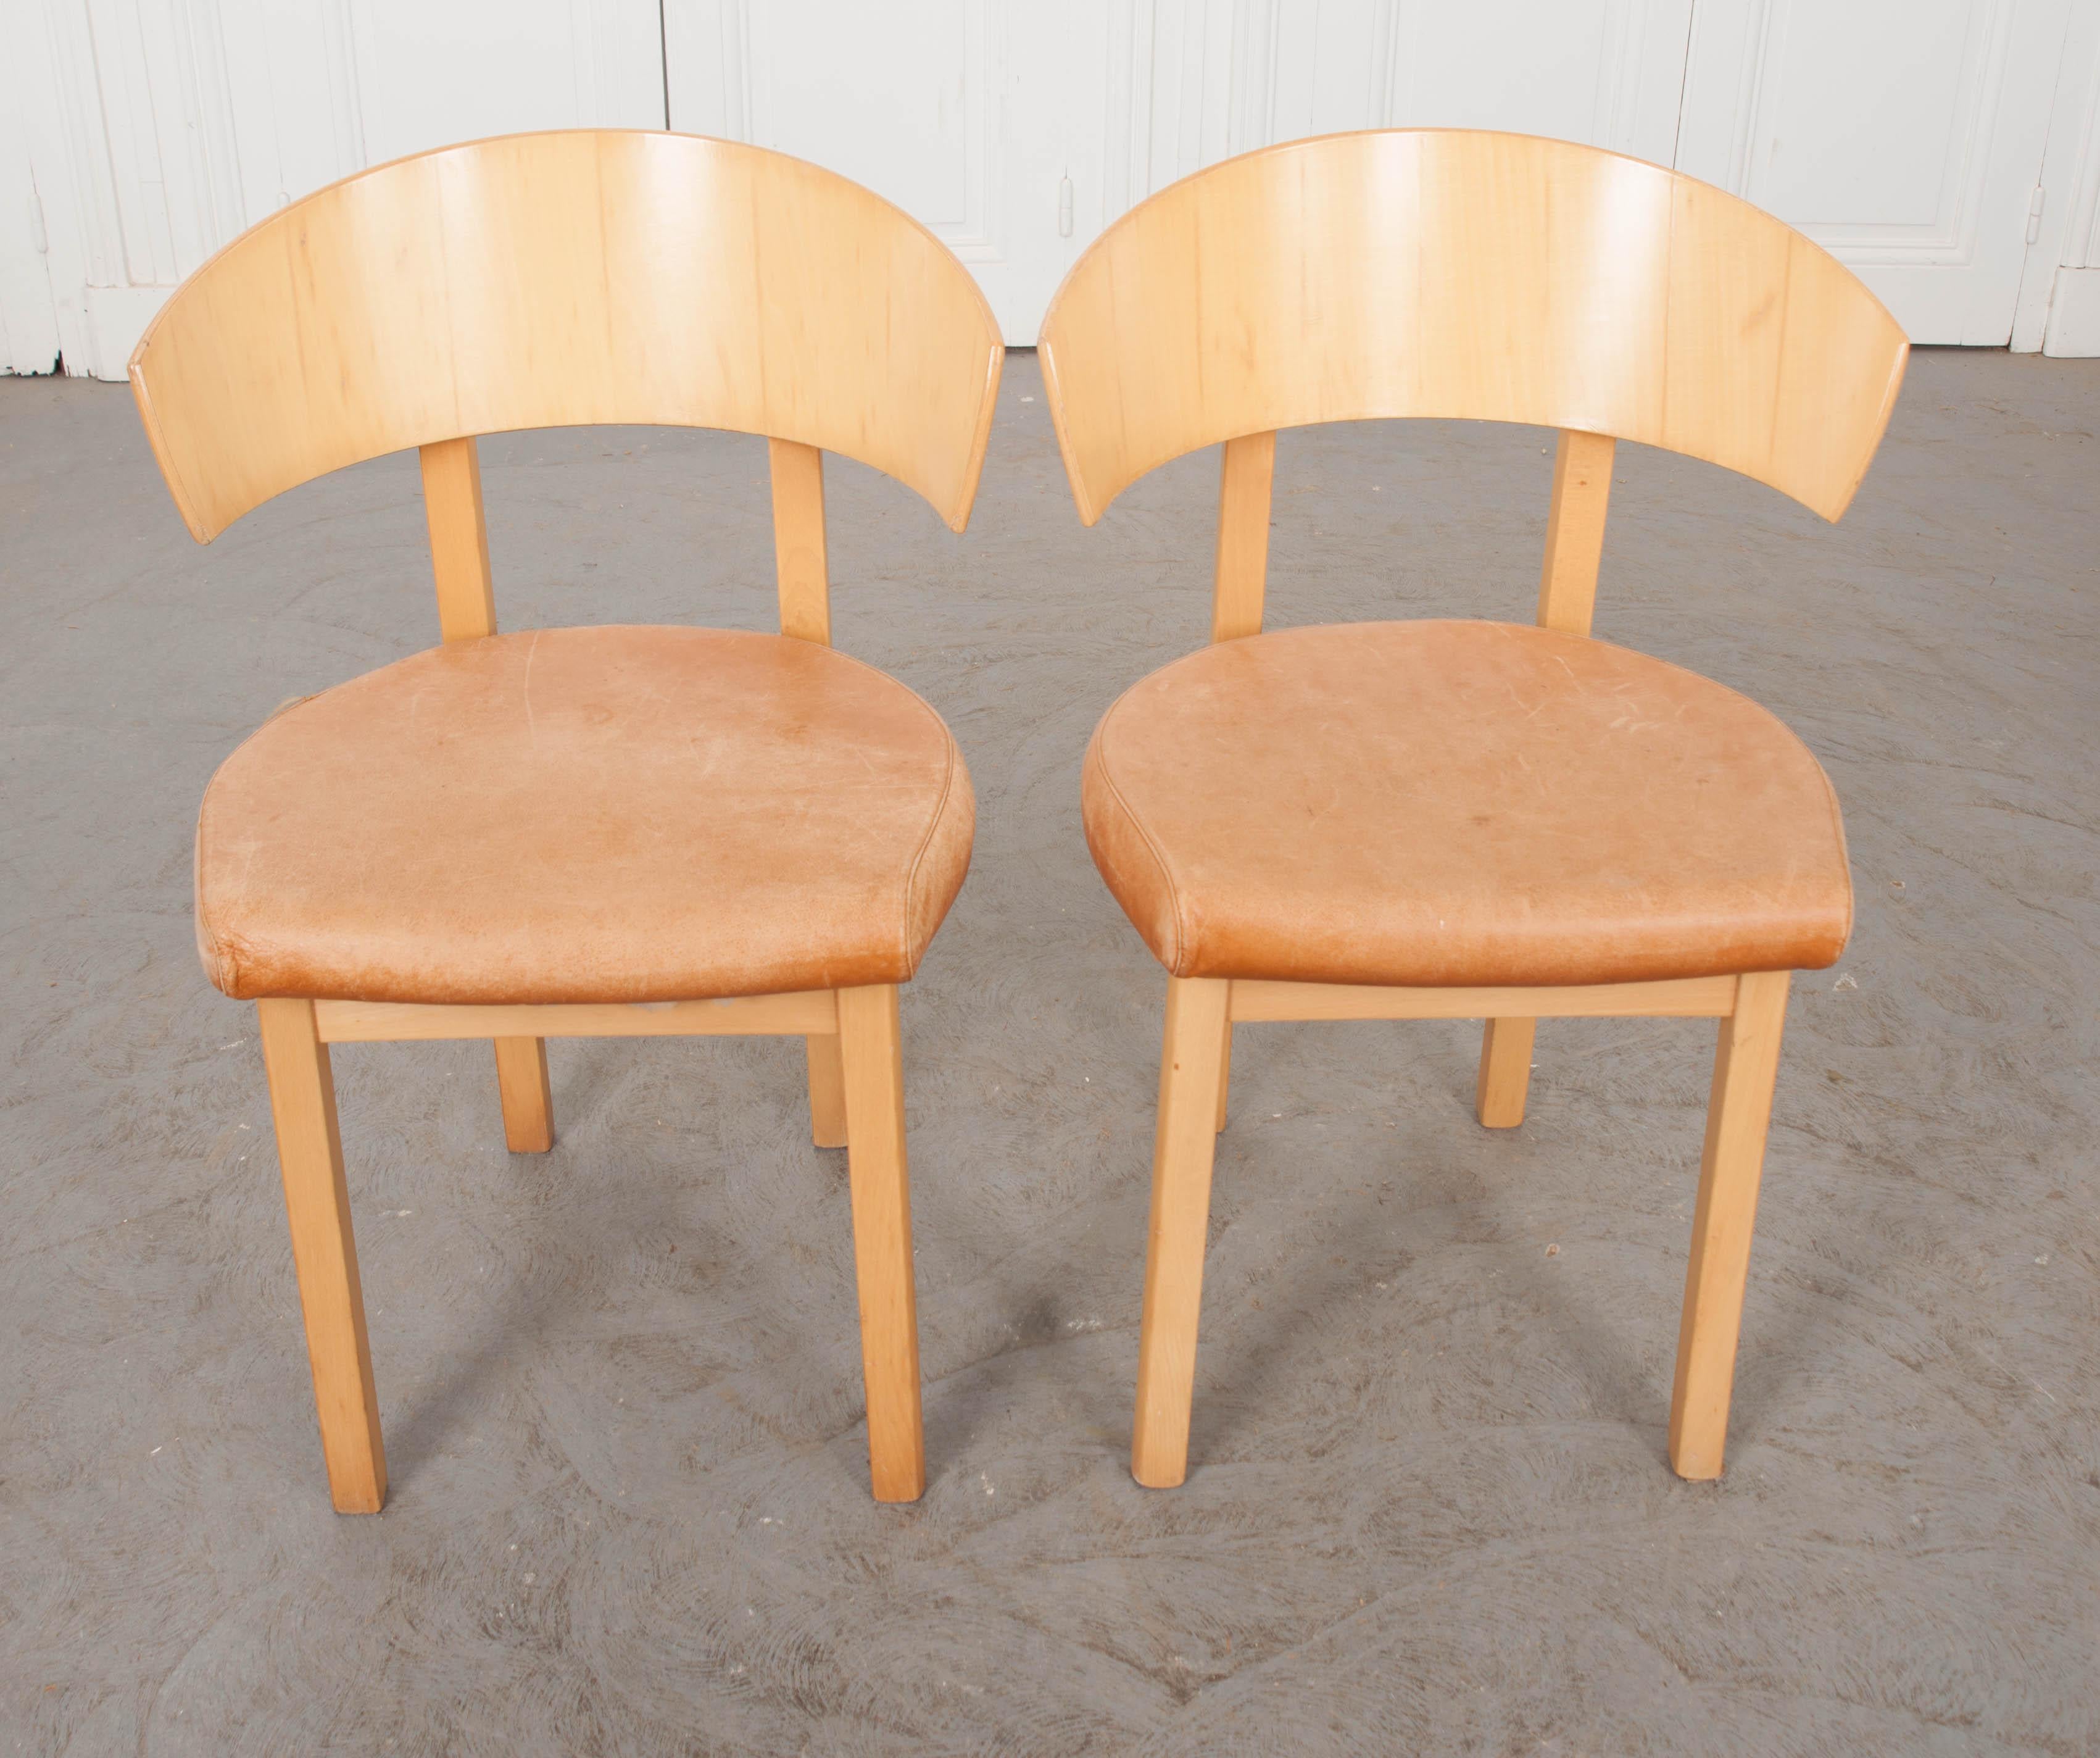 Wood Pair of French Vintage Art Deco-Style Side Chairs